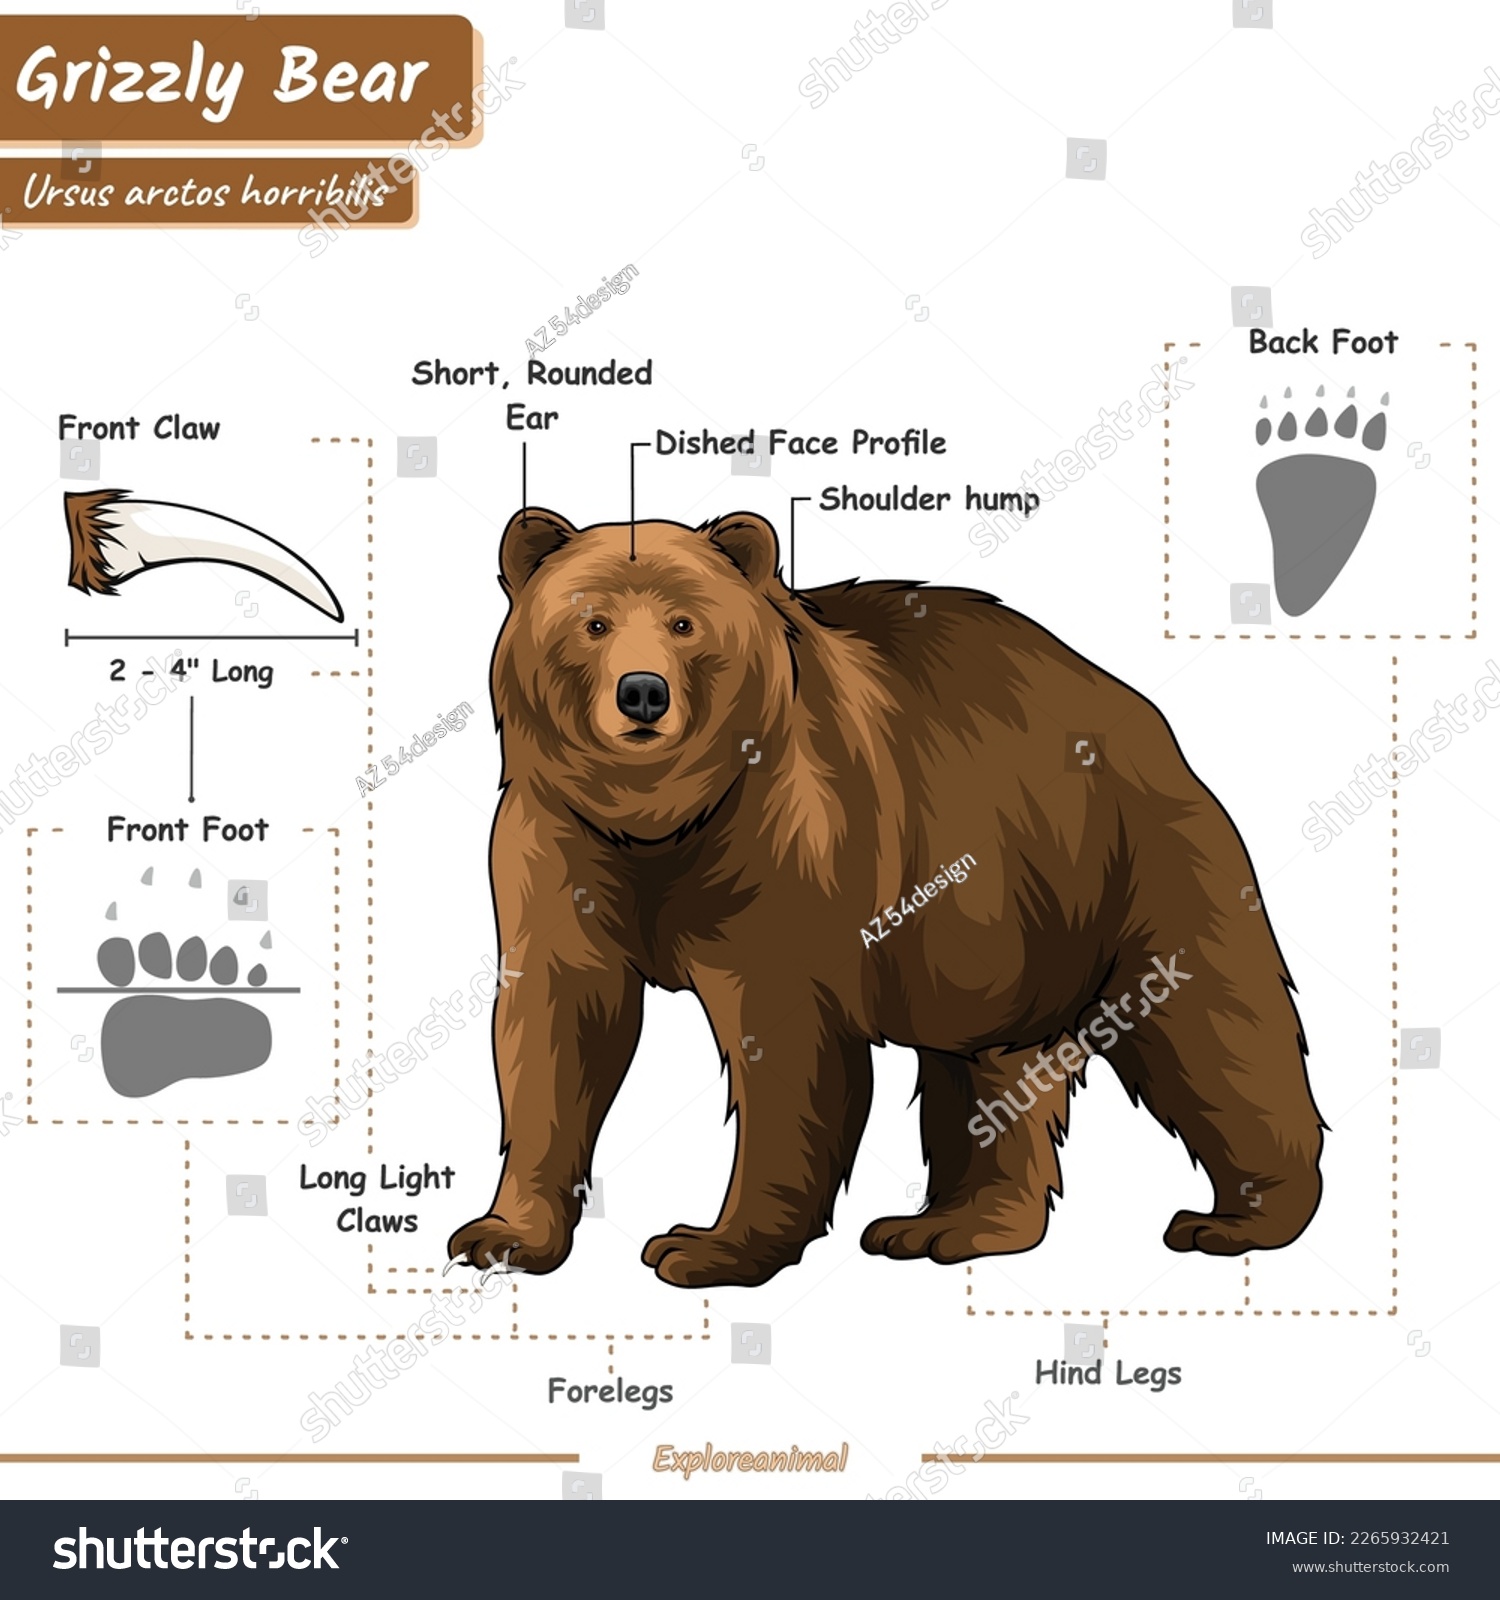 Anatomy of grizzly bear. diagram about grizzly - Royalty Free Stock ...